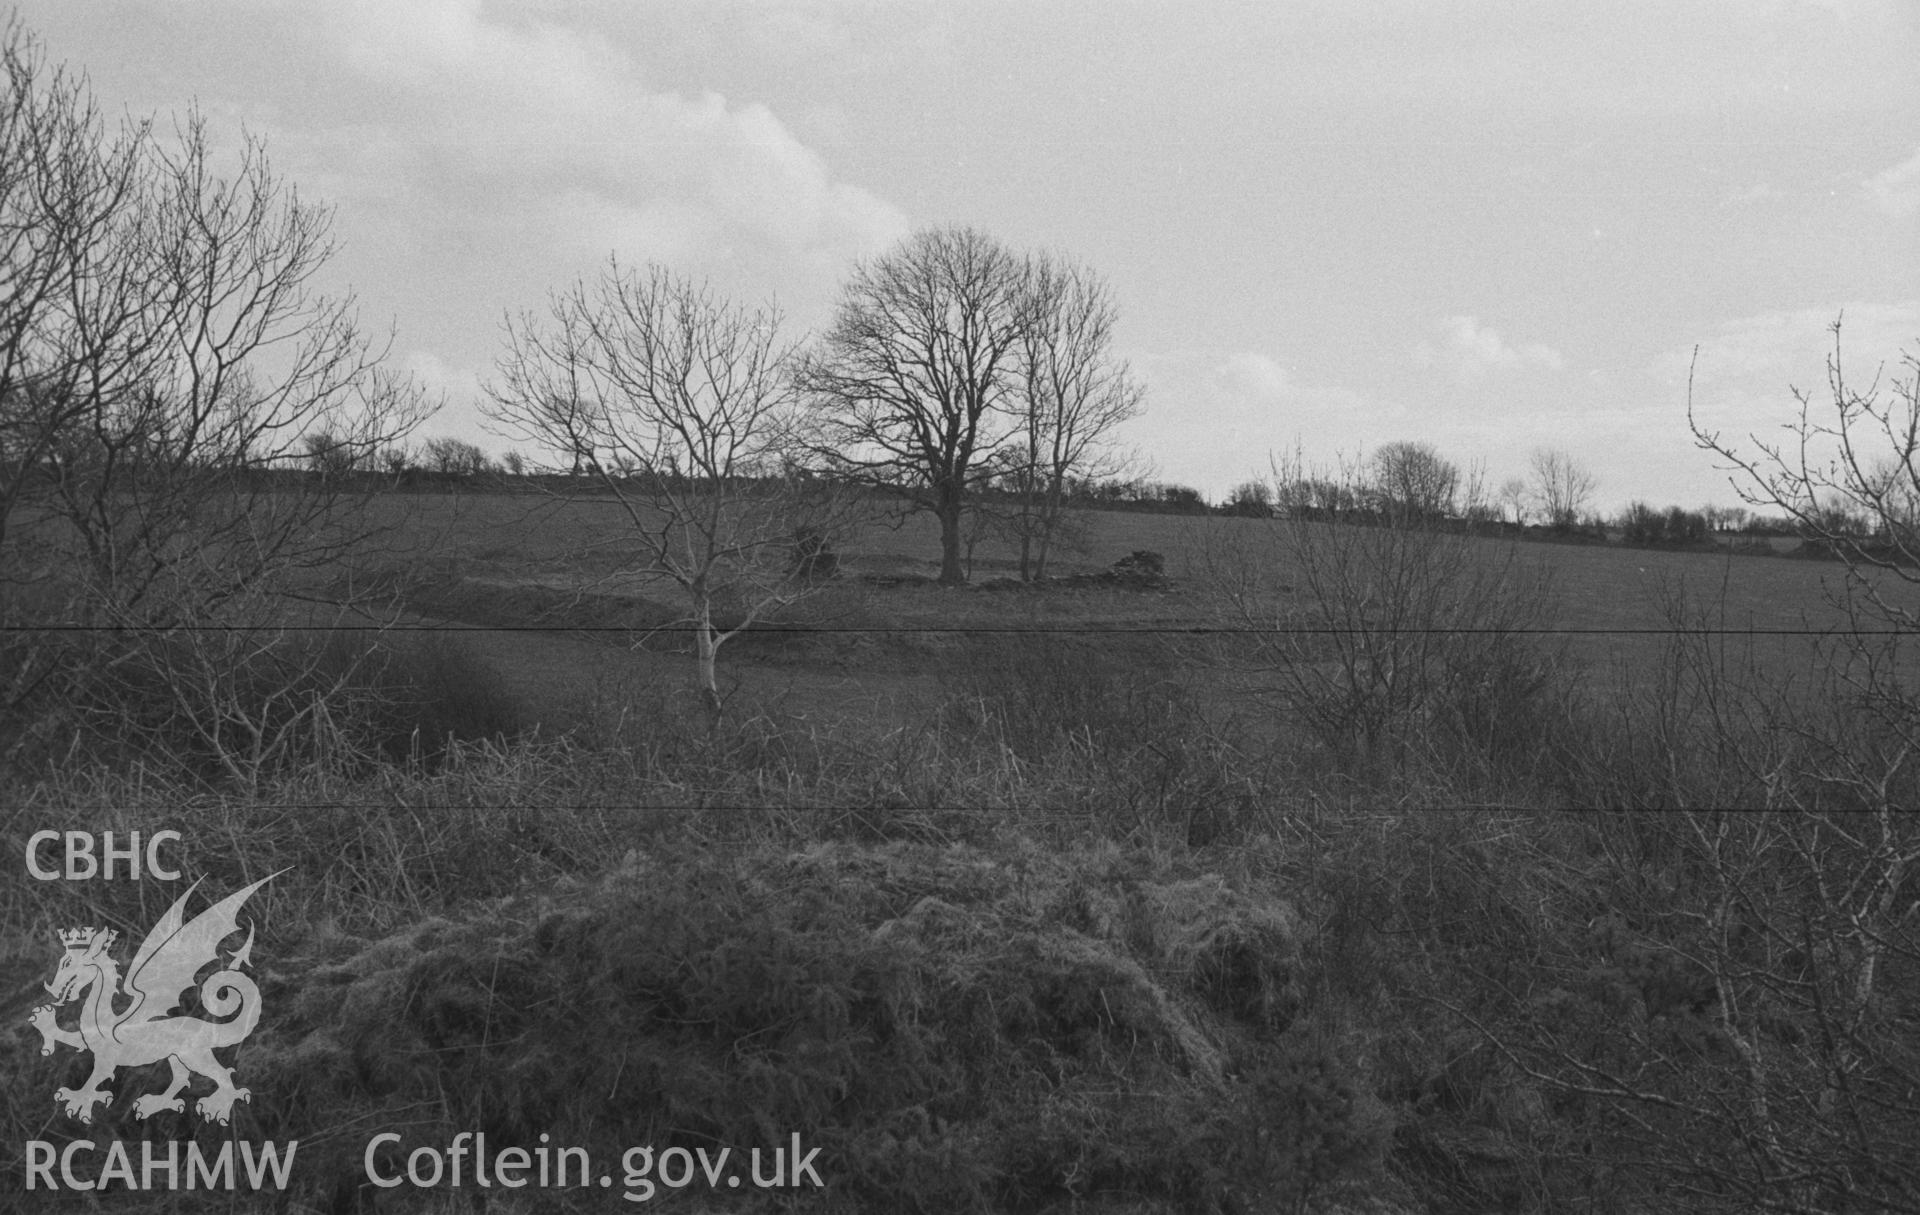 Digital copy of a black and white negative showing site of St Mary's church from the top of the Norman motte near Llanfair Trefhelygen. Photographed in April 1963 by Arthur O. Chater from Grid Reference SN 3442 4422, looking south west.